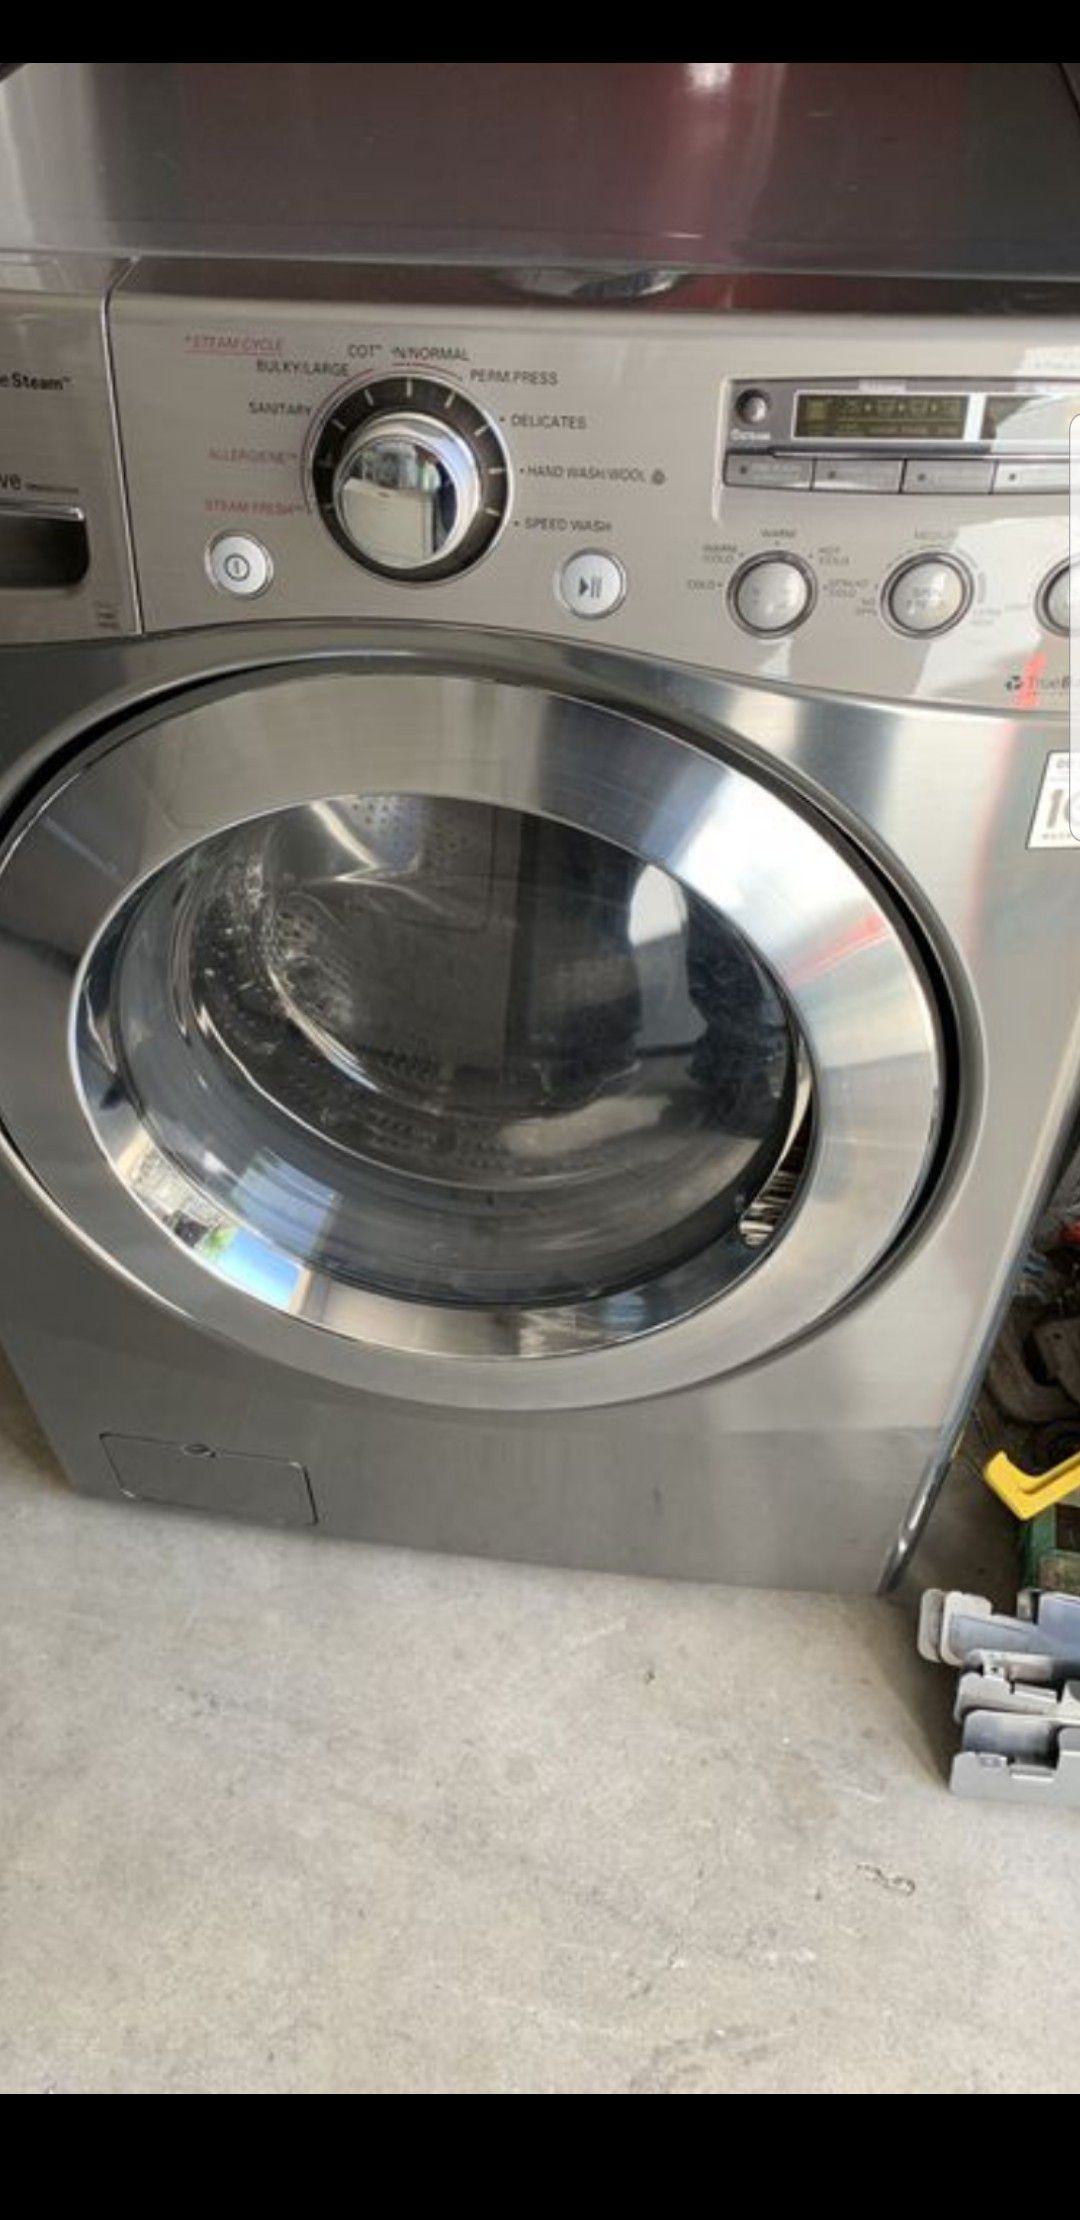 Huge Sale store full of nice reconditioned refrigerator washer dryer stove stackable+financing available available free warranty🐾🌼🍀\%